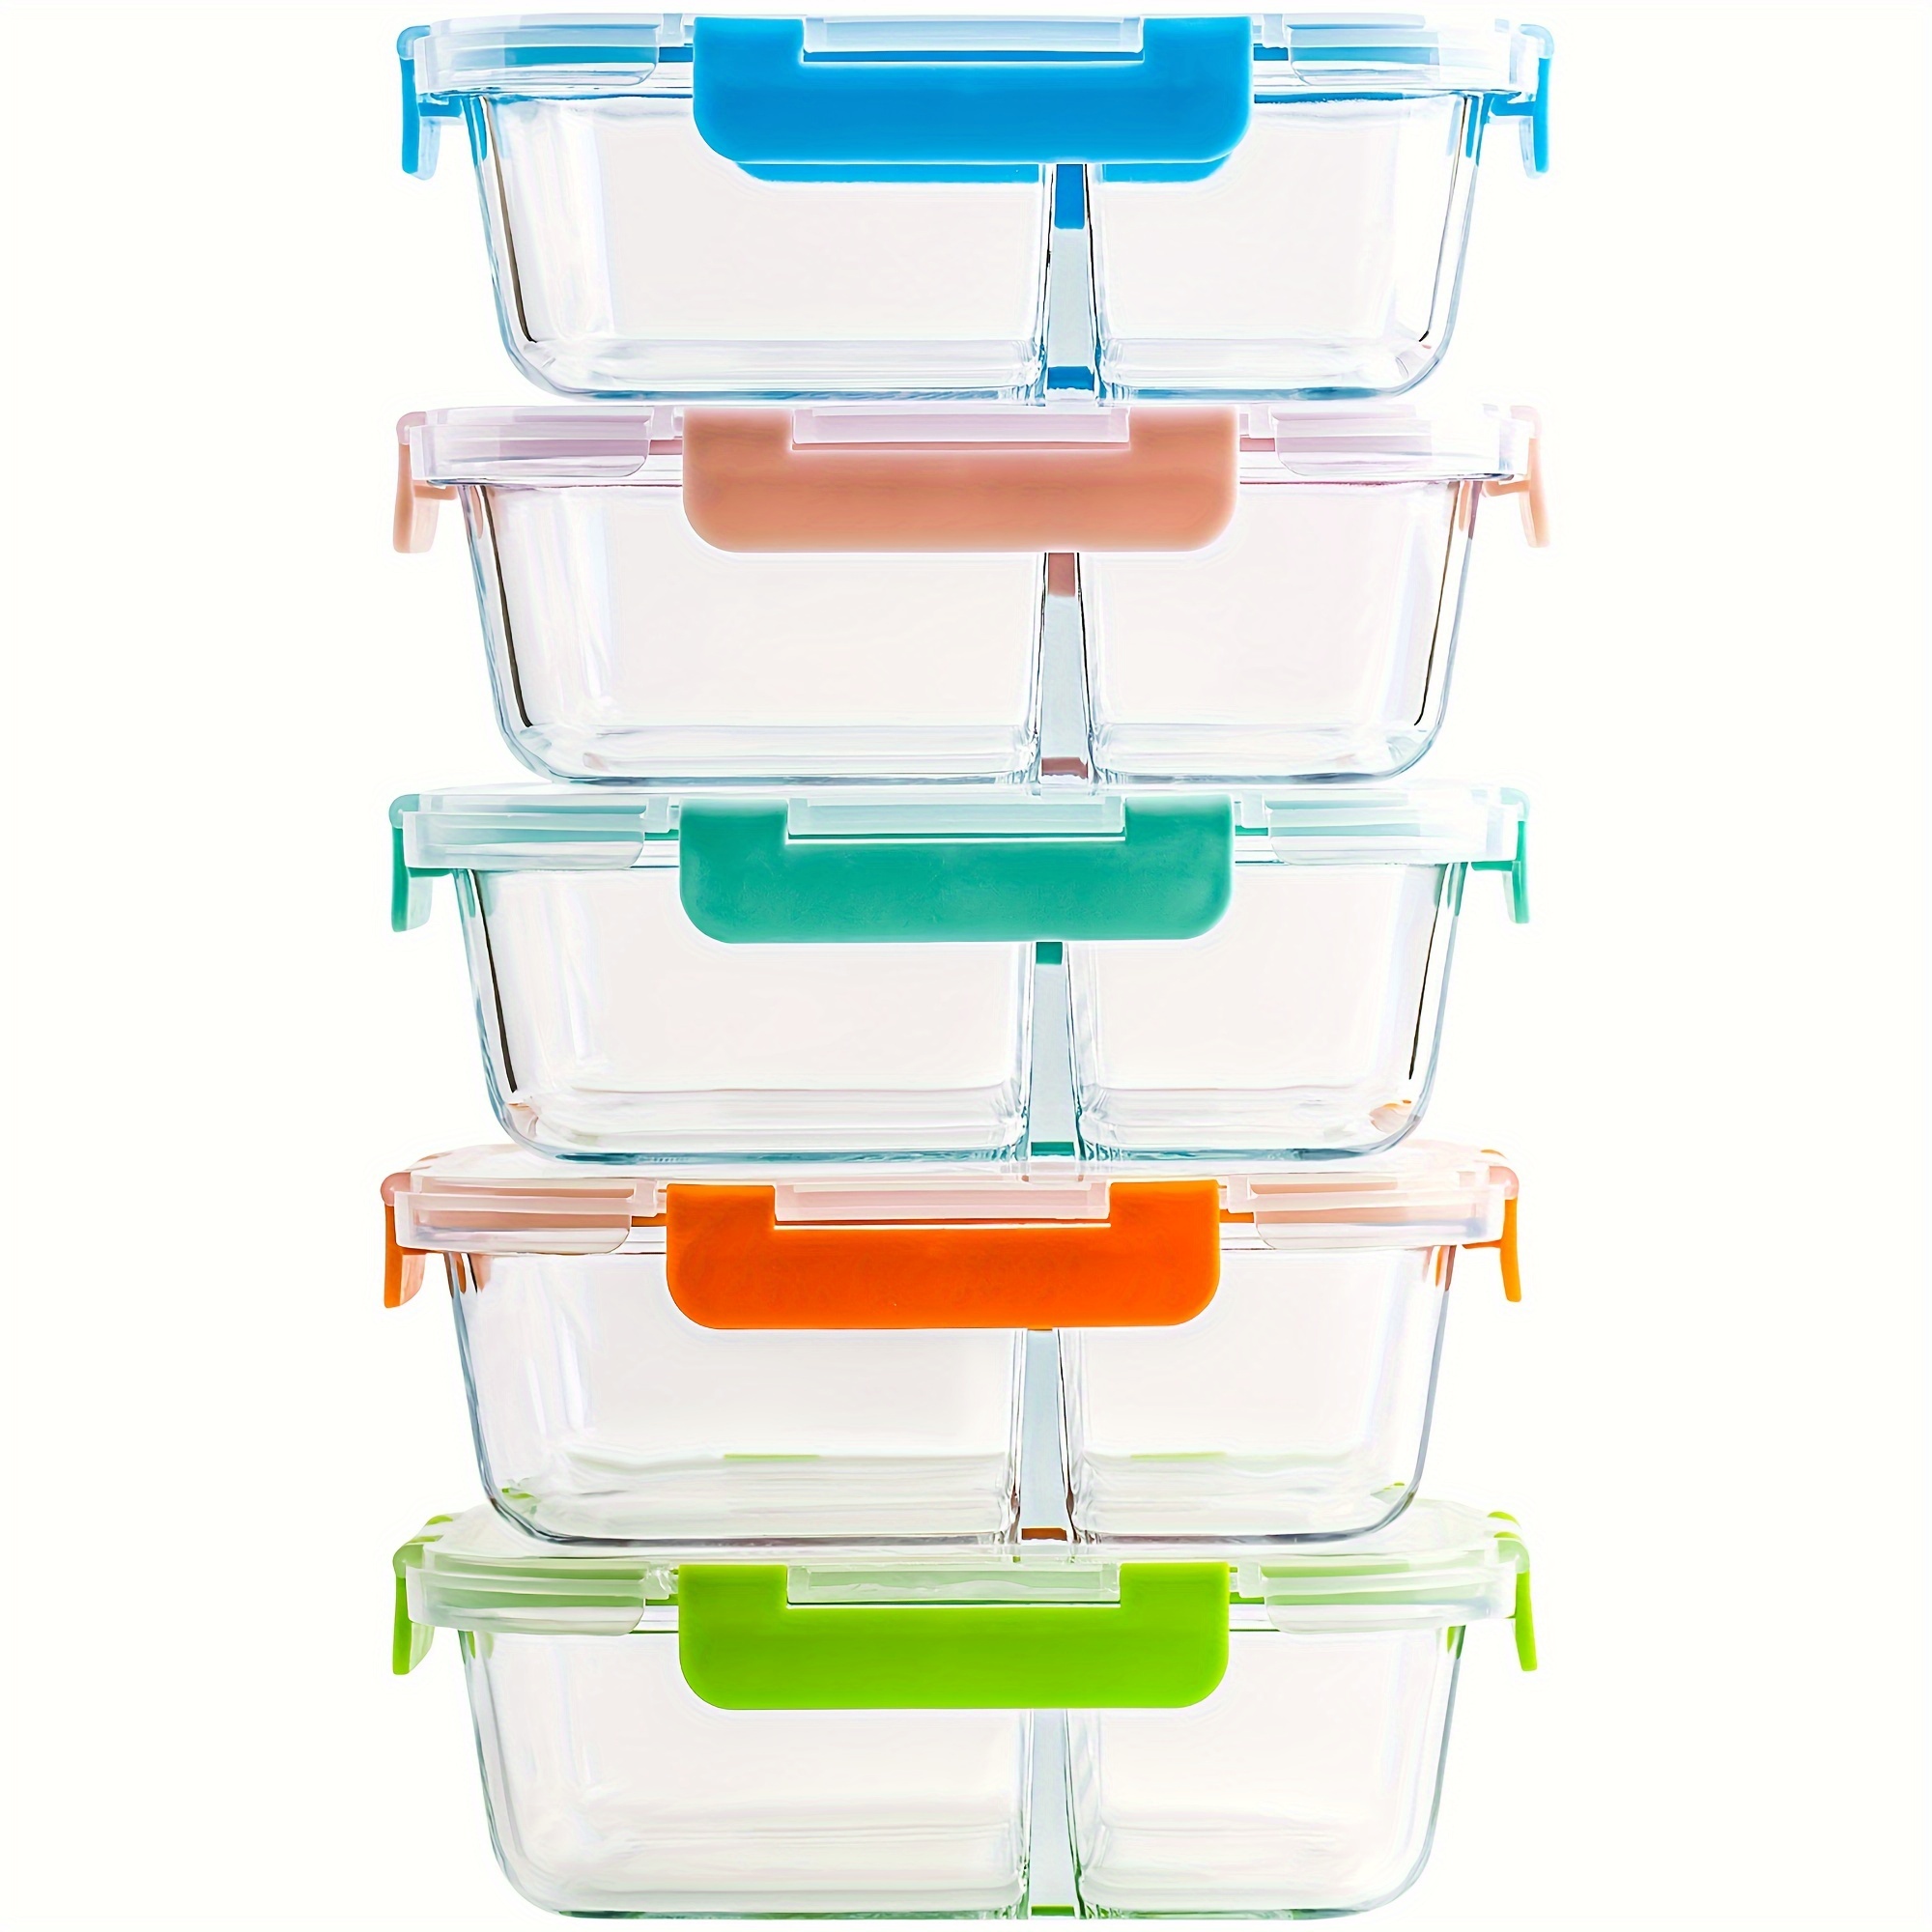 

5 Pack Glass Meal Prep Containers 2/3 Compartment With Lids 34oz Divided Glass Storage Containers For Lunch At Work, Leak-proof Portion Control Food Containers, Microwave/dishwasher Safe